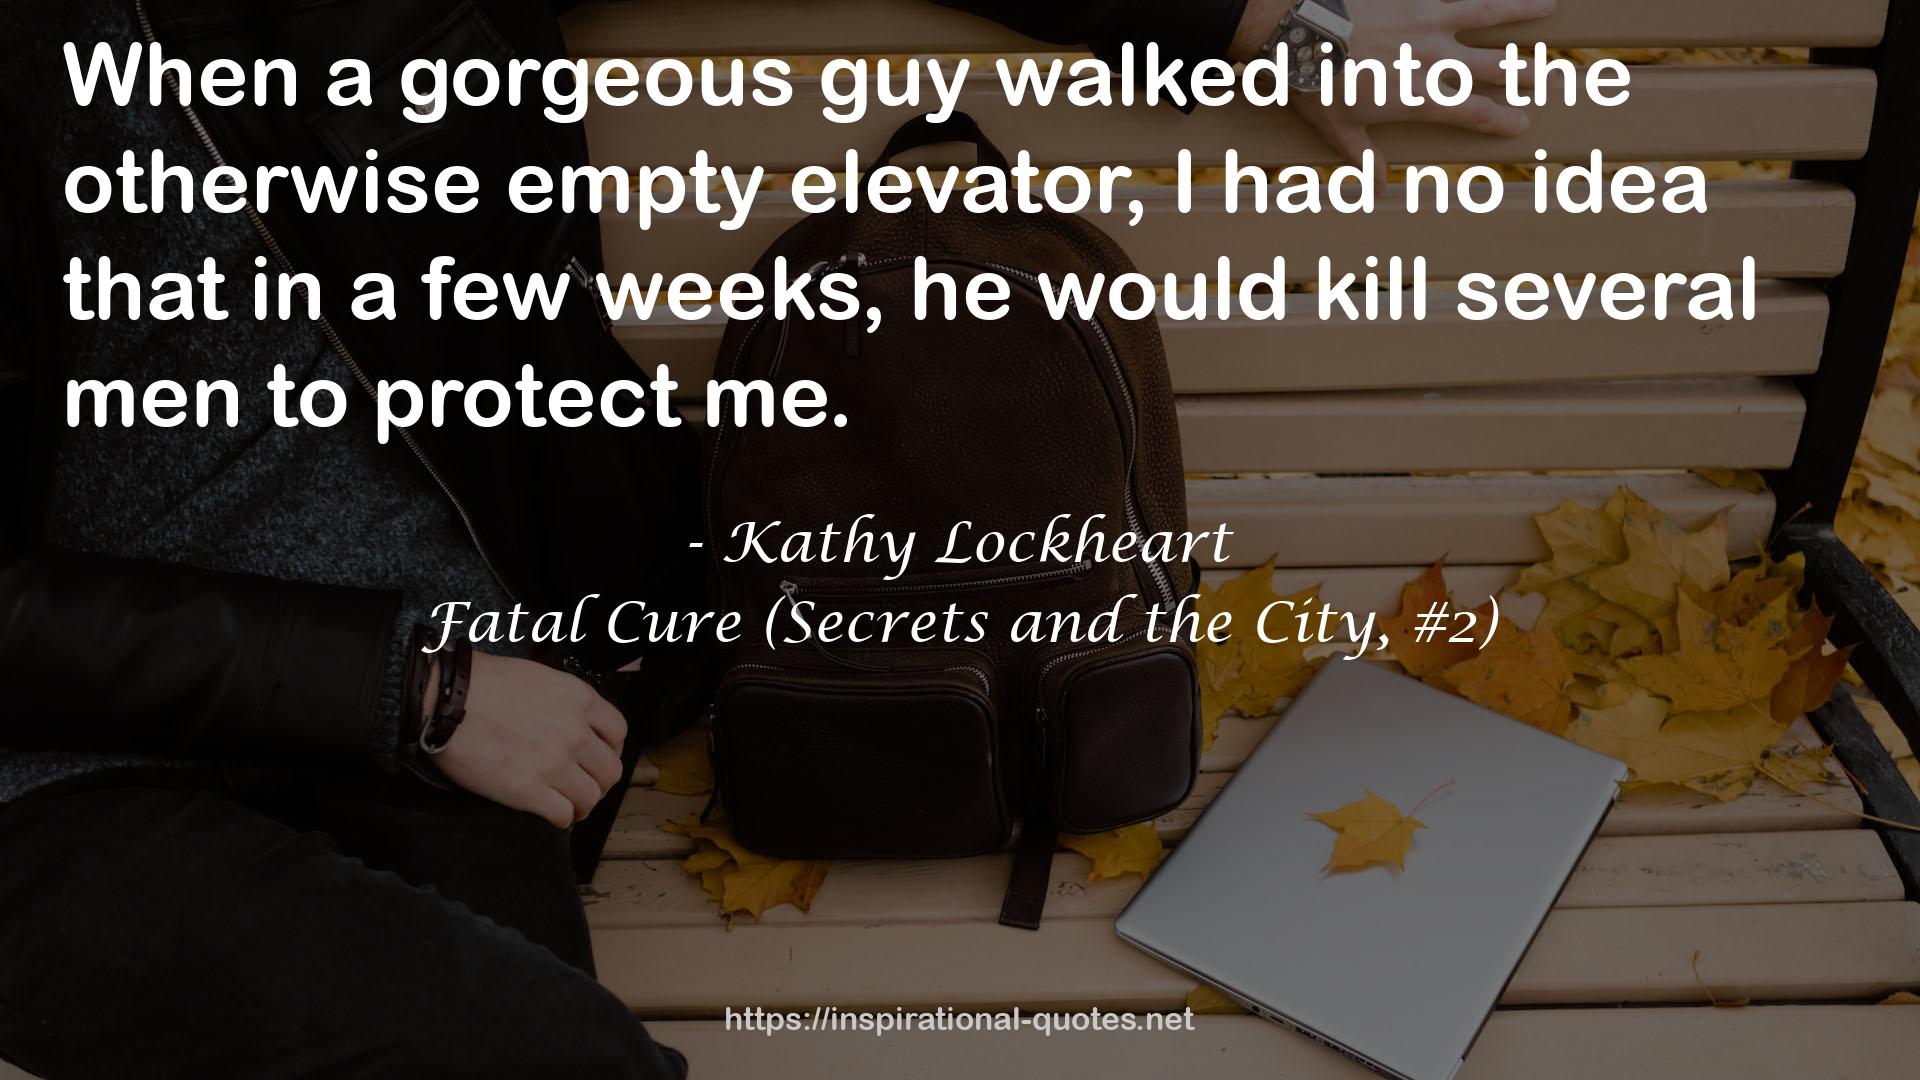 Fatal Cure (Secrets and the City, #2) QUOTES